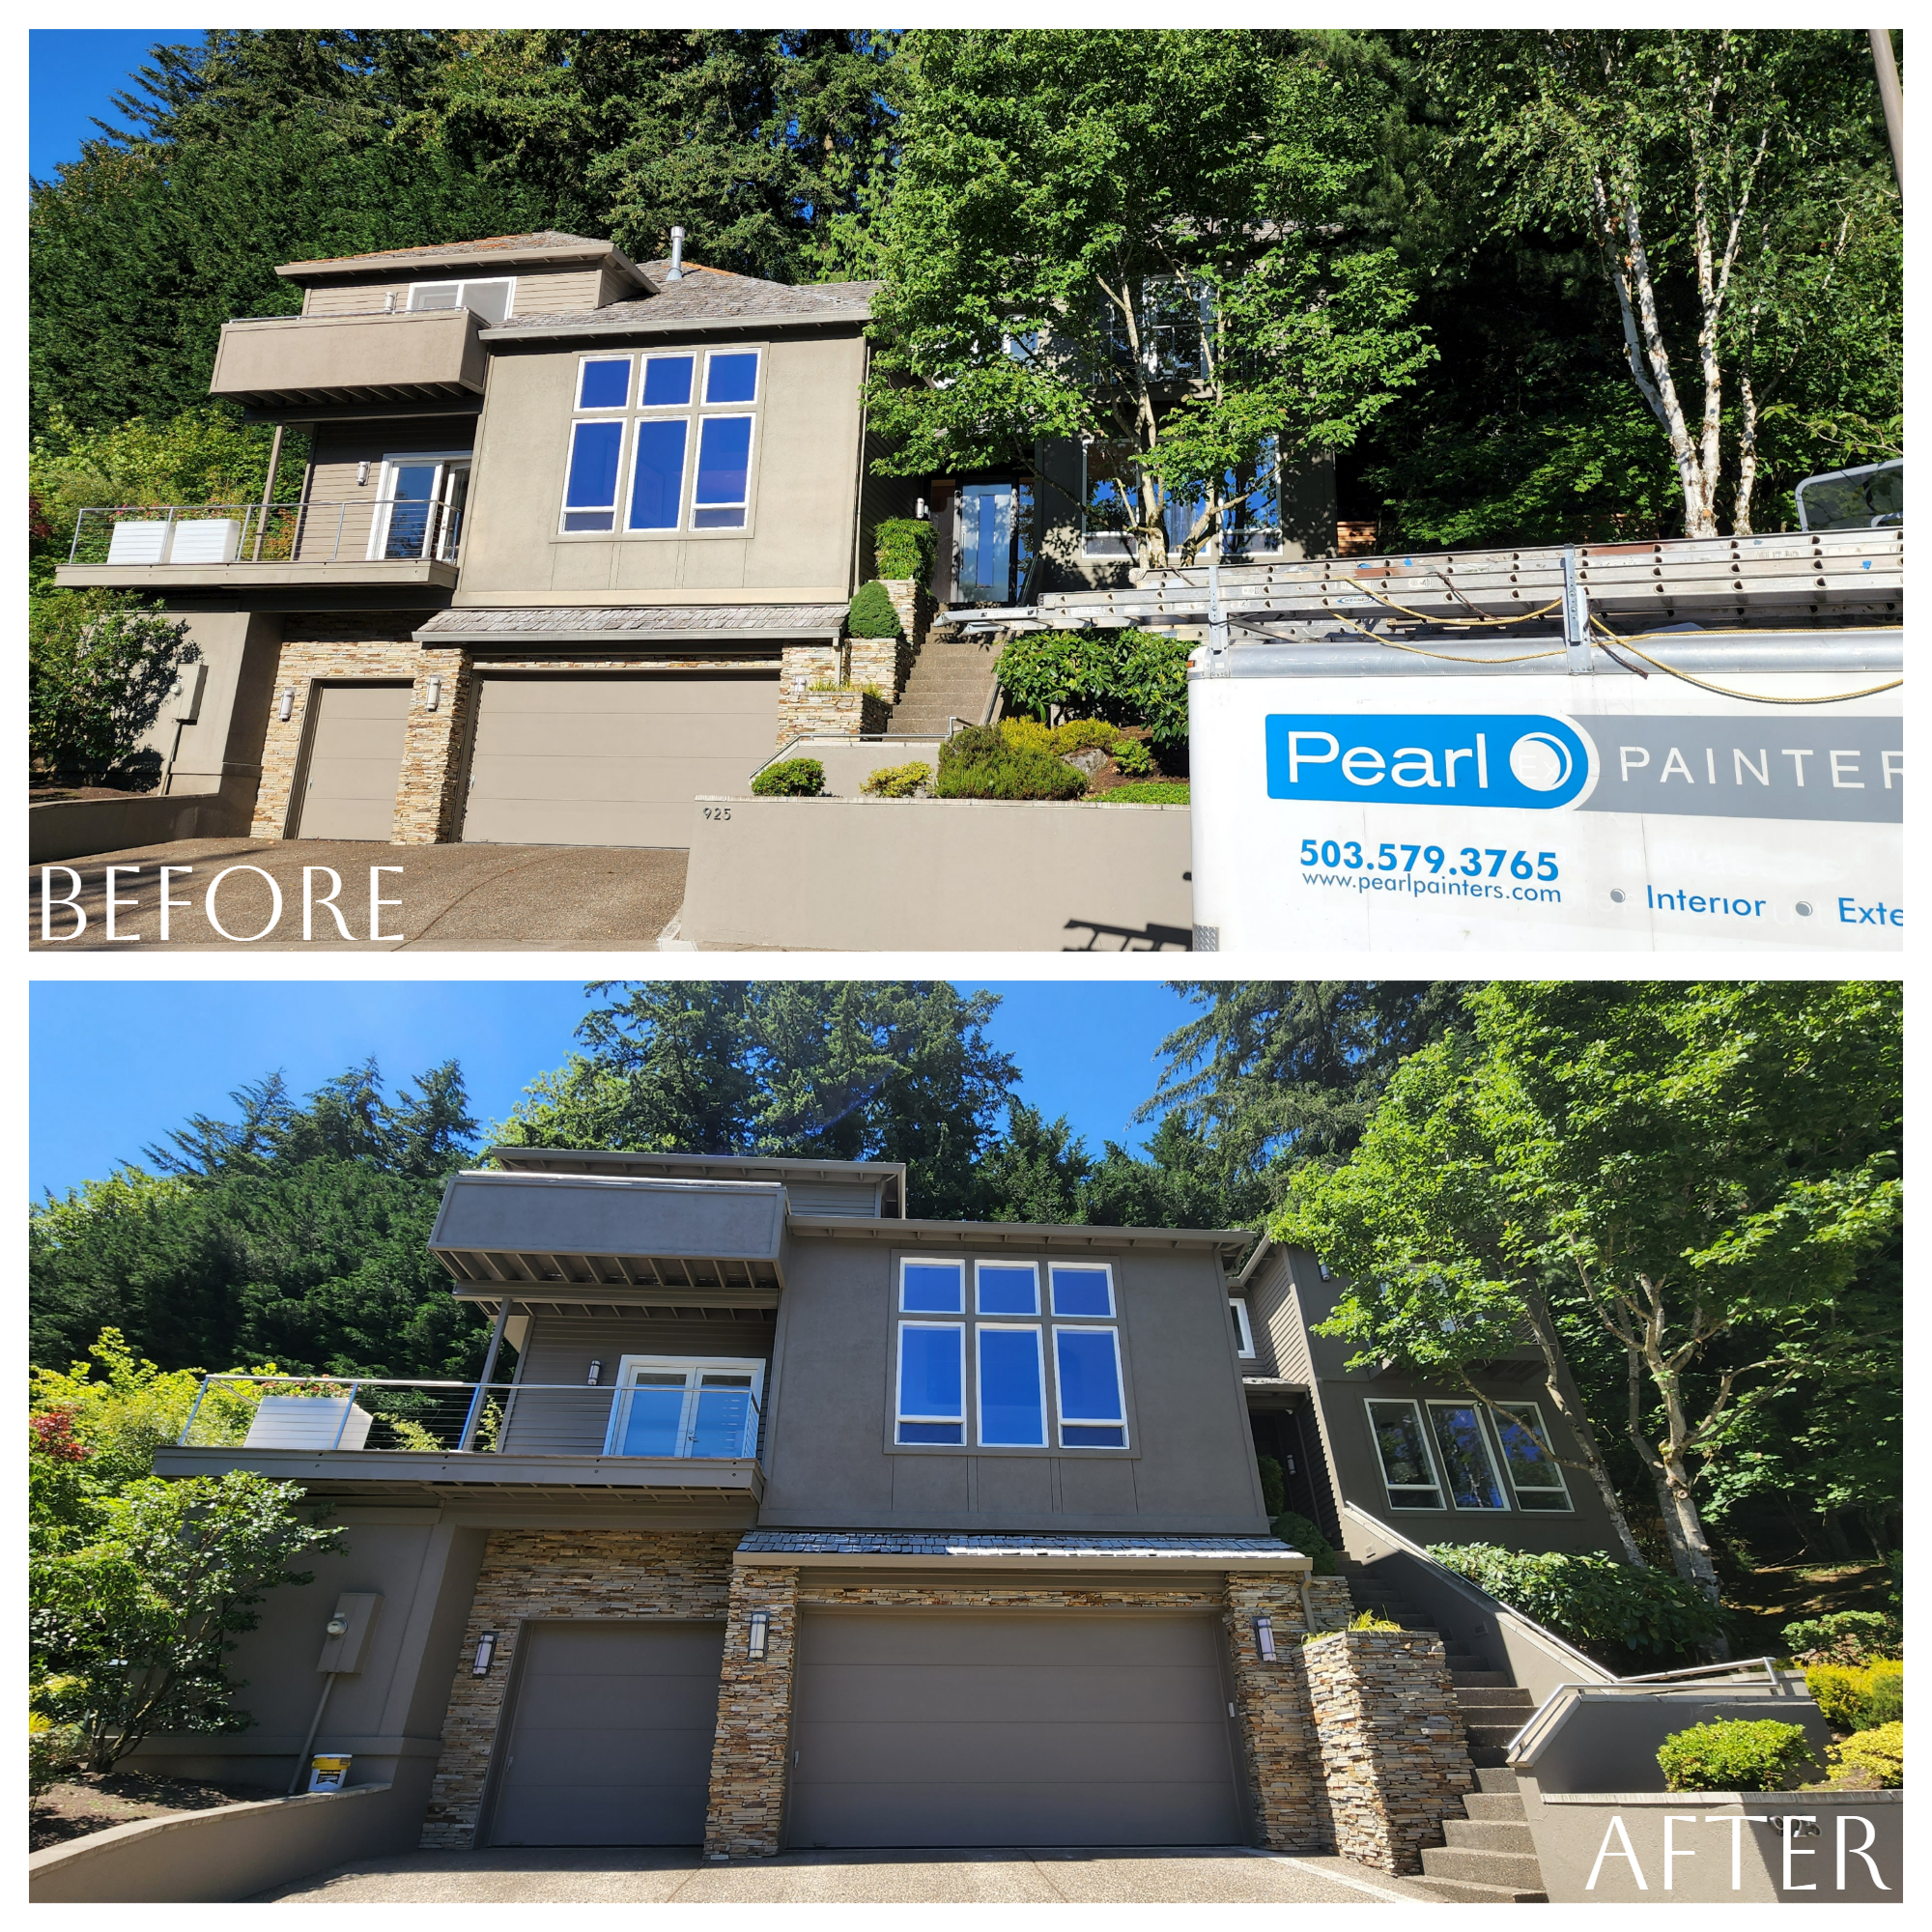 Two pictures of a house before and after exterior painting.